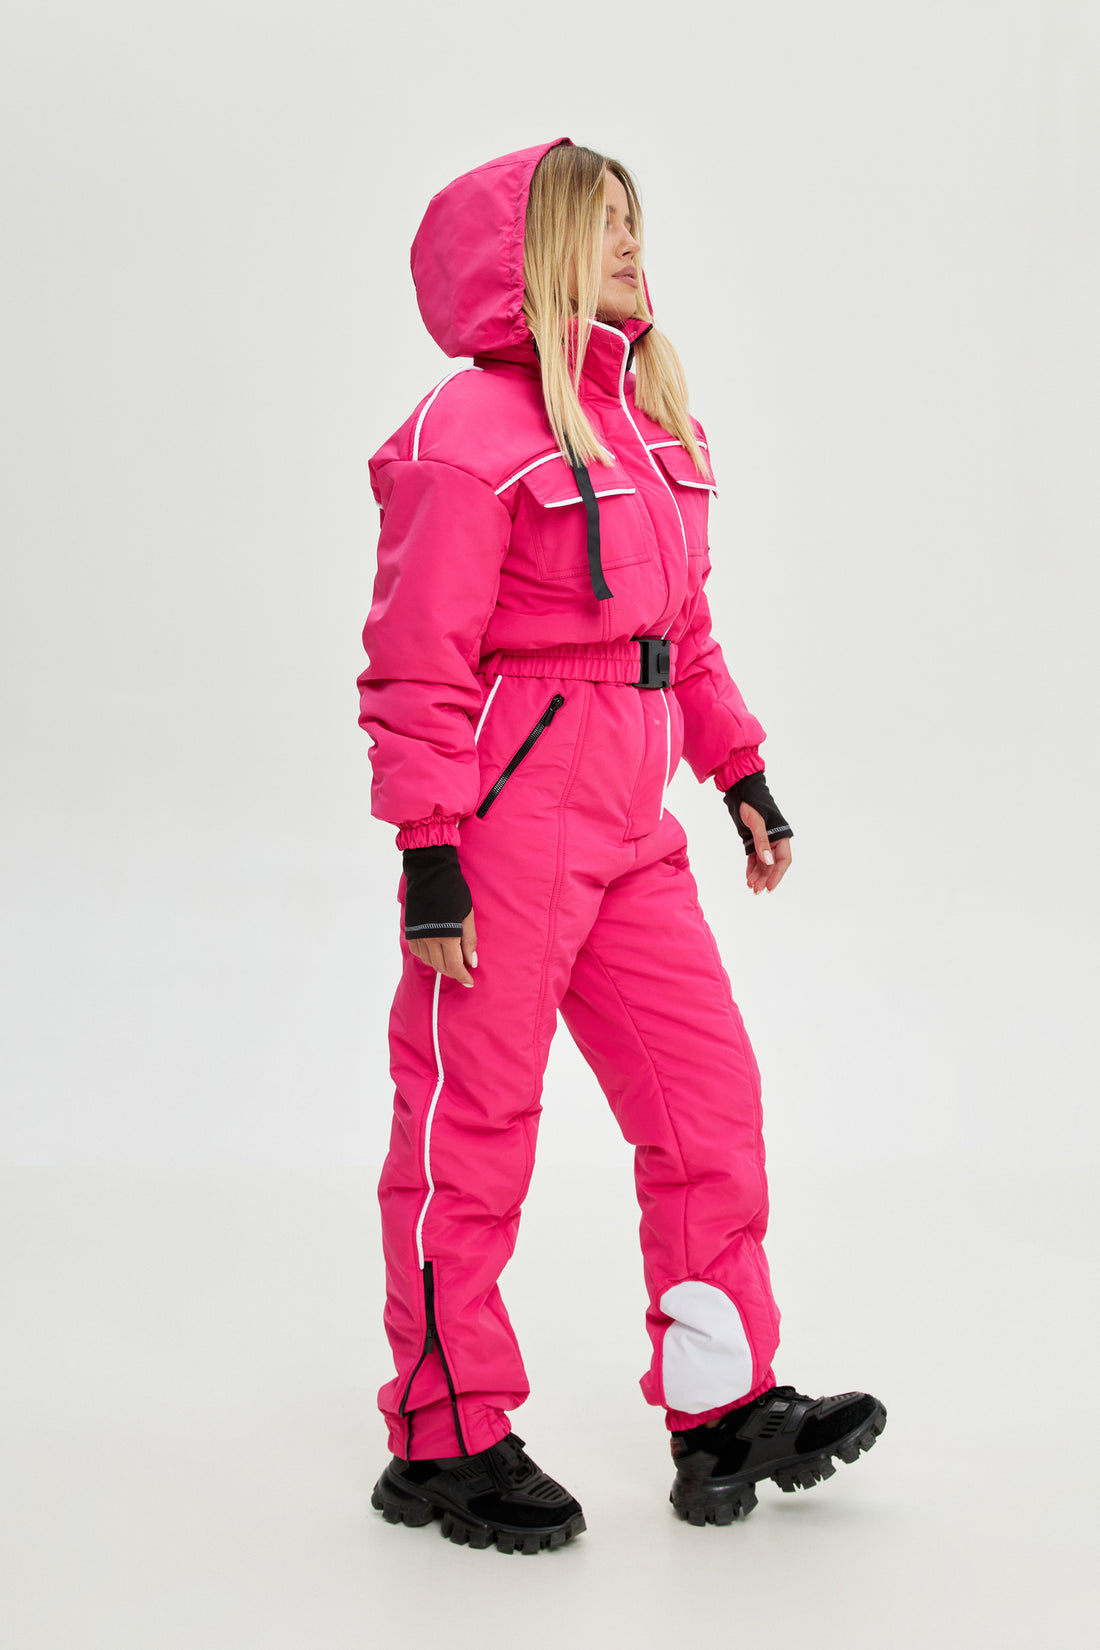 Hot pink ski suit BLANC - PINK with white edging - One piece ski suit for women